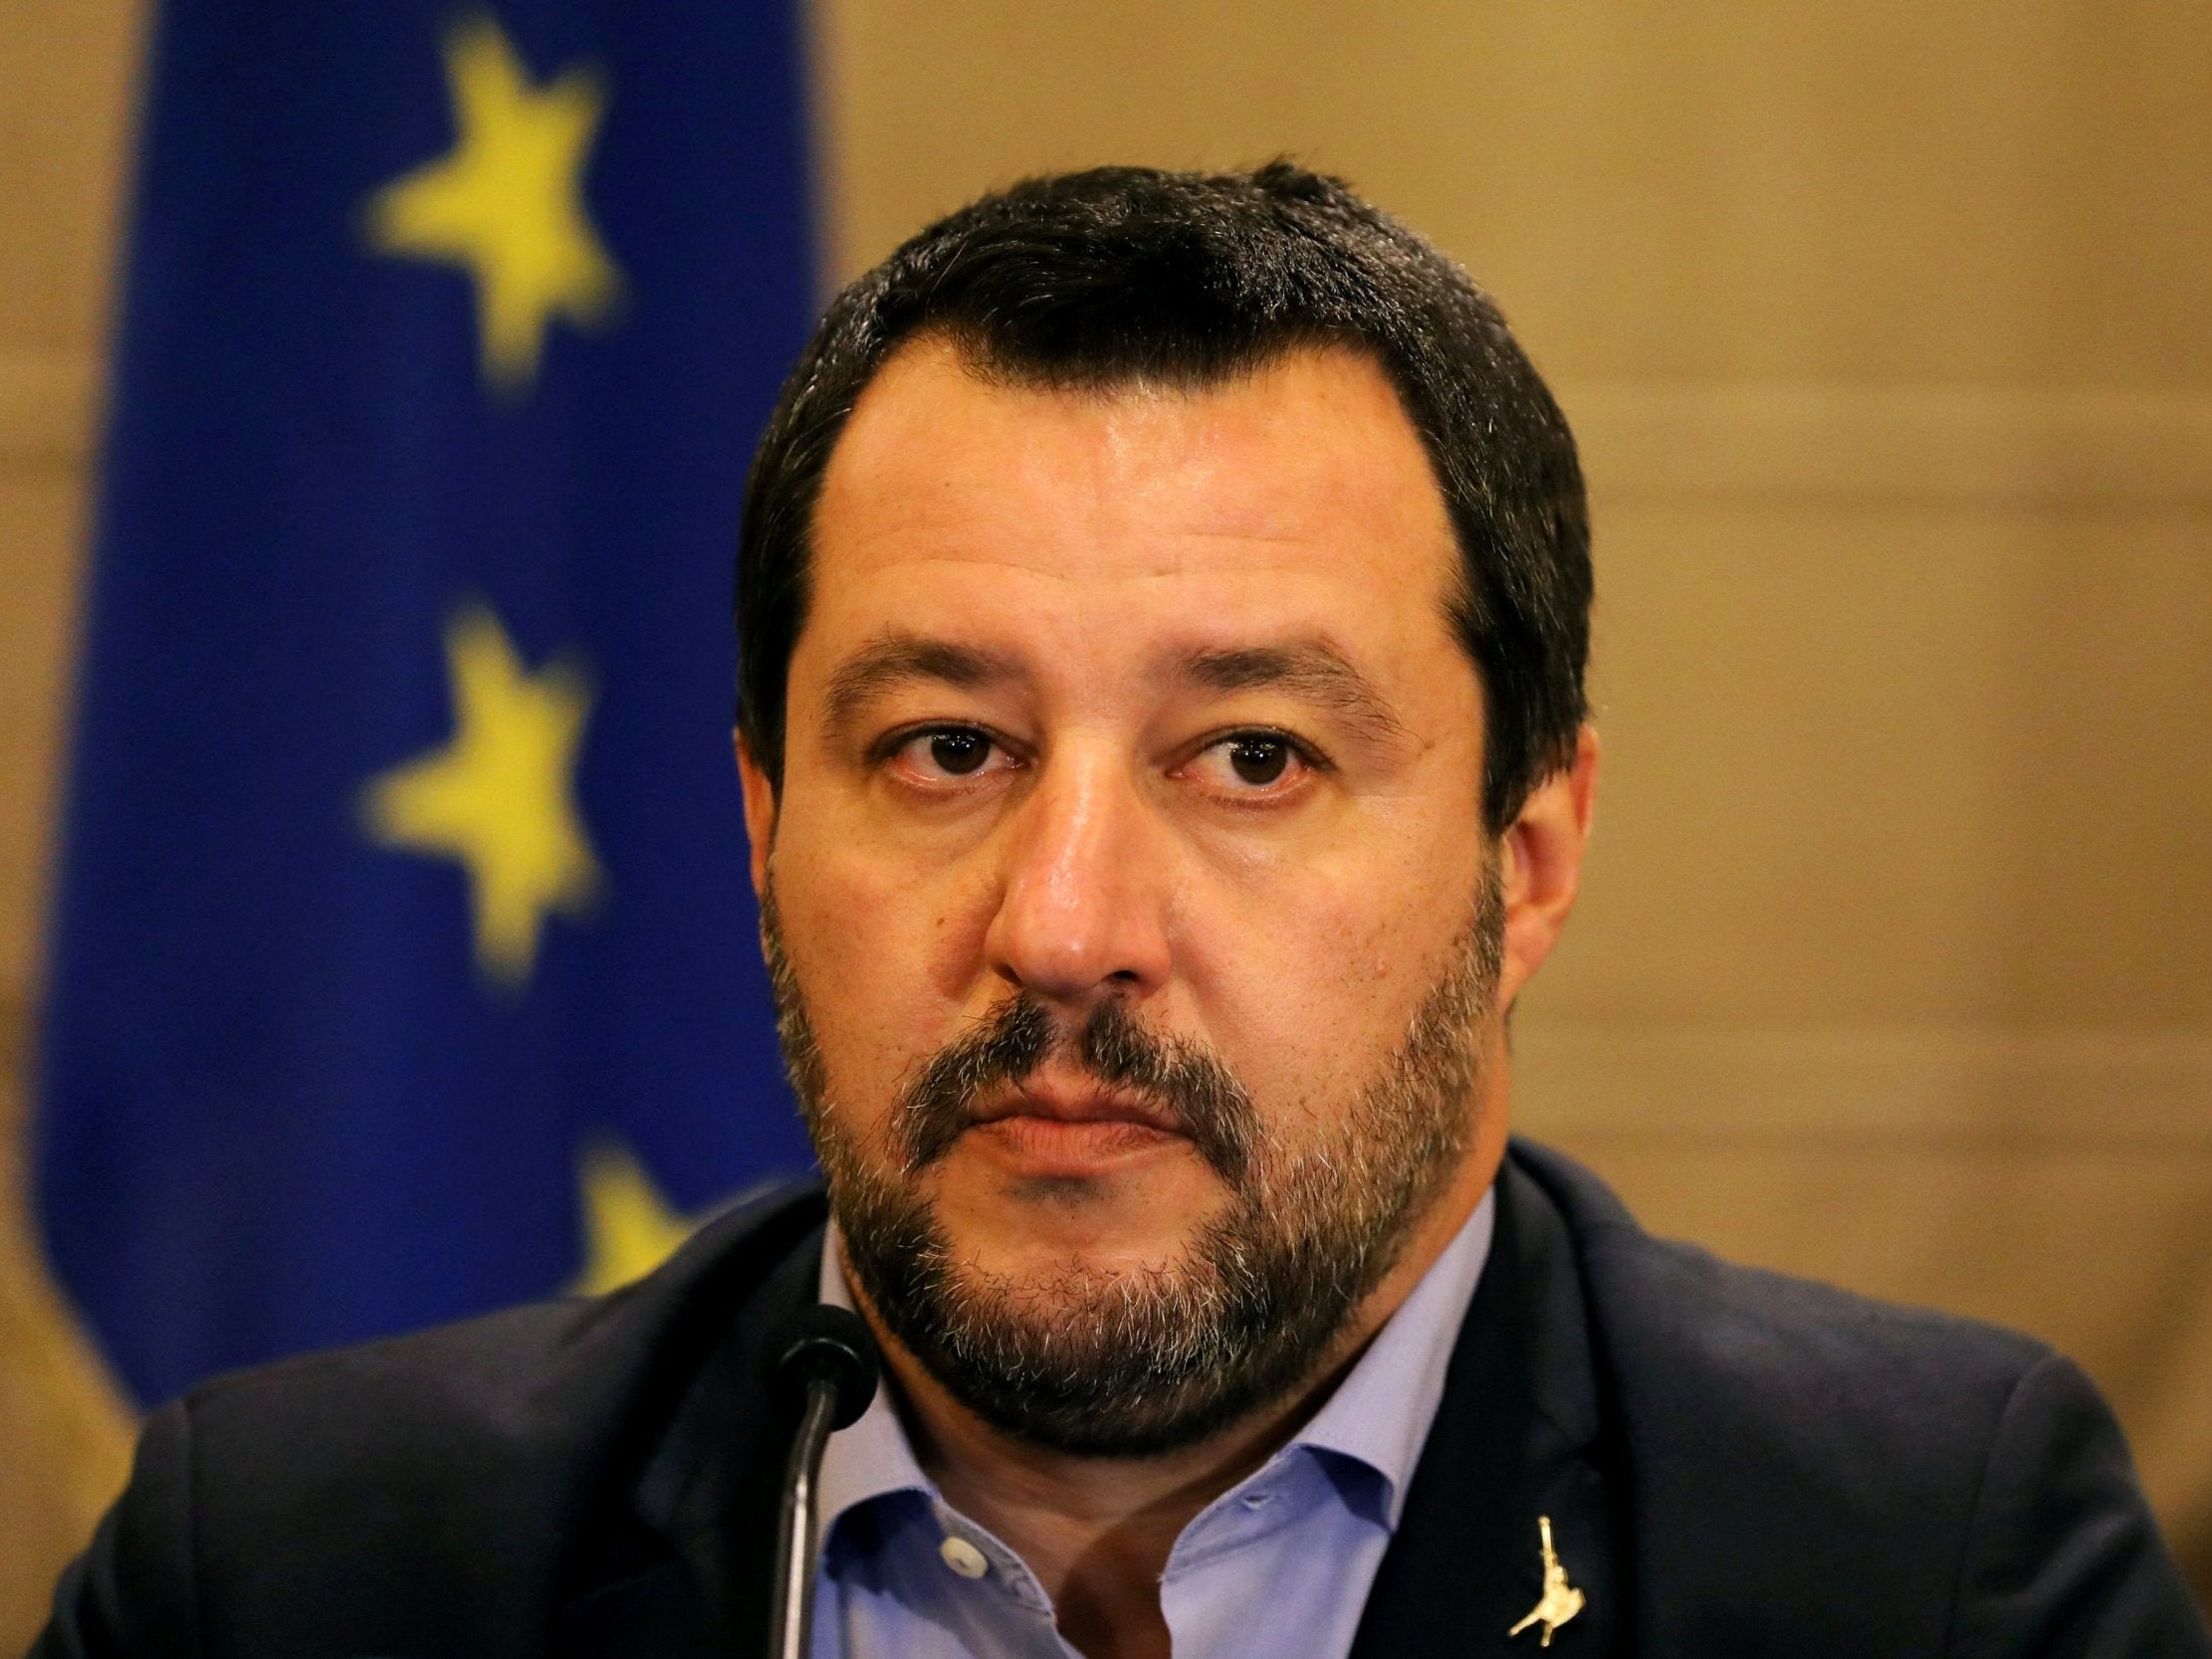 Matteo Salvini is the leader of the League party and is currently the deputy prime minister and interior minister